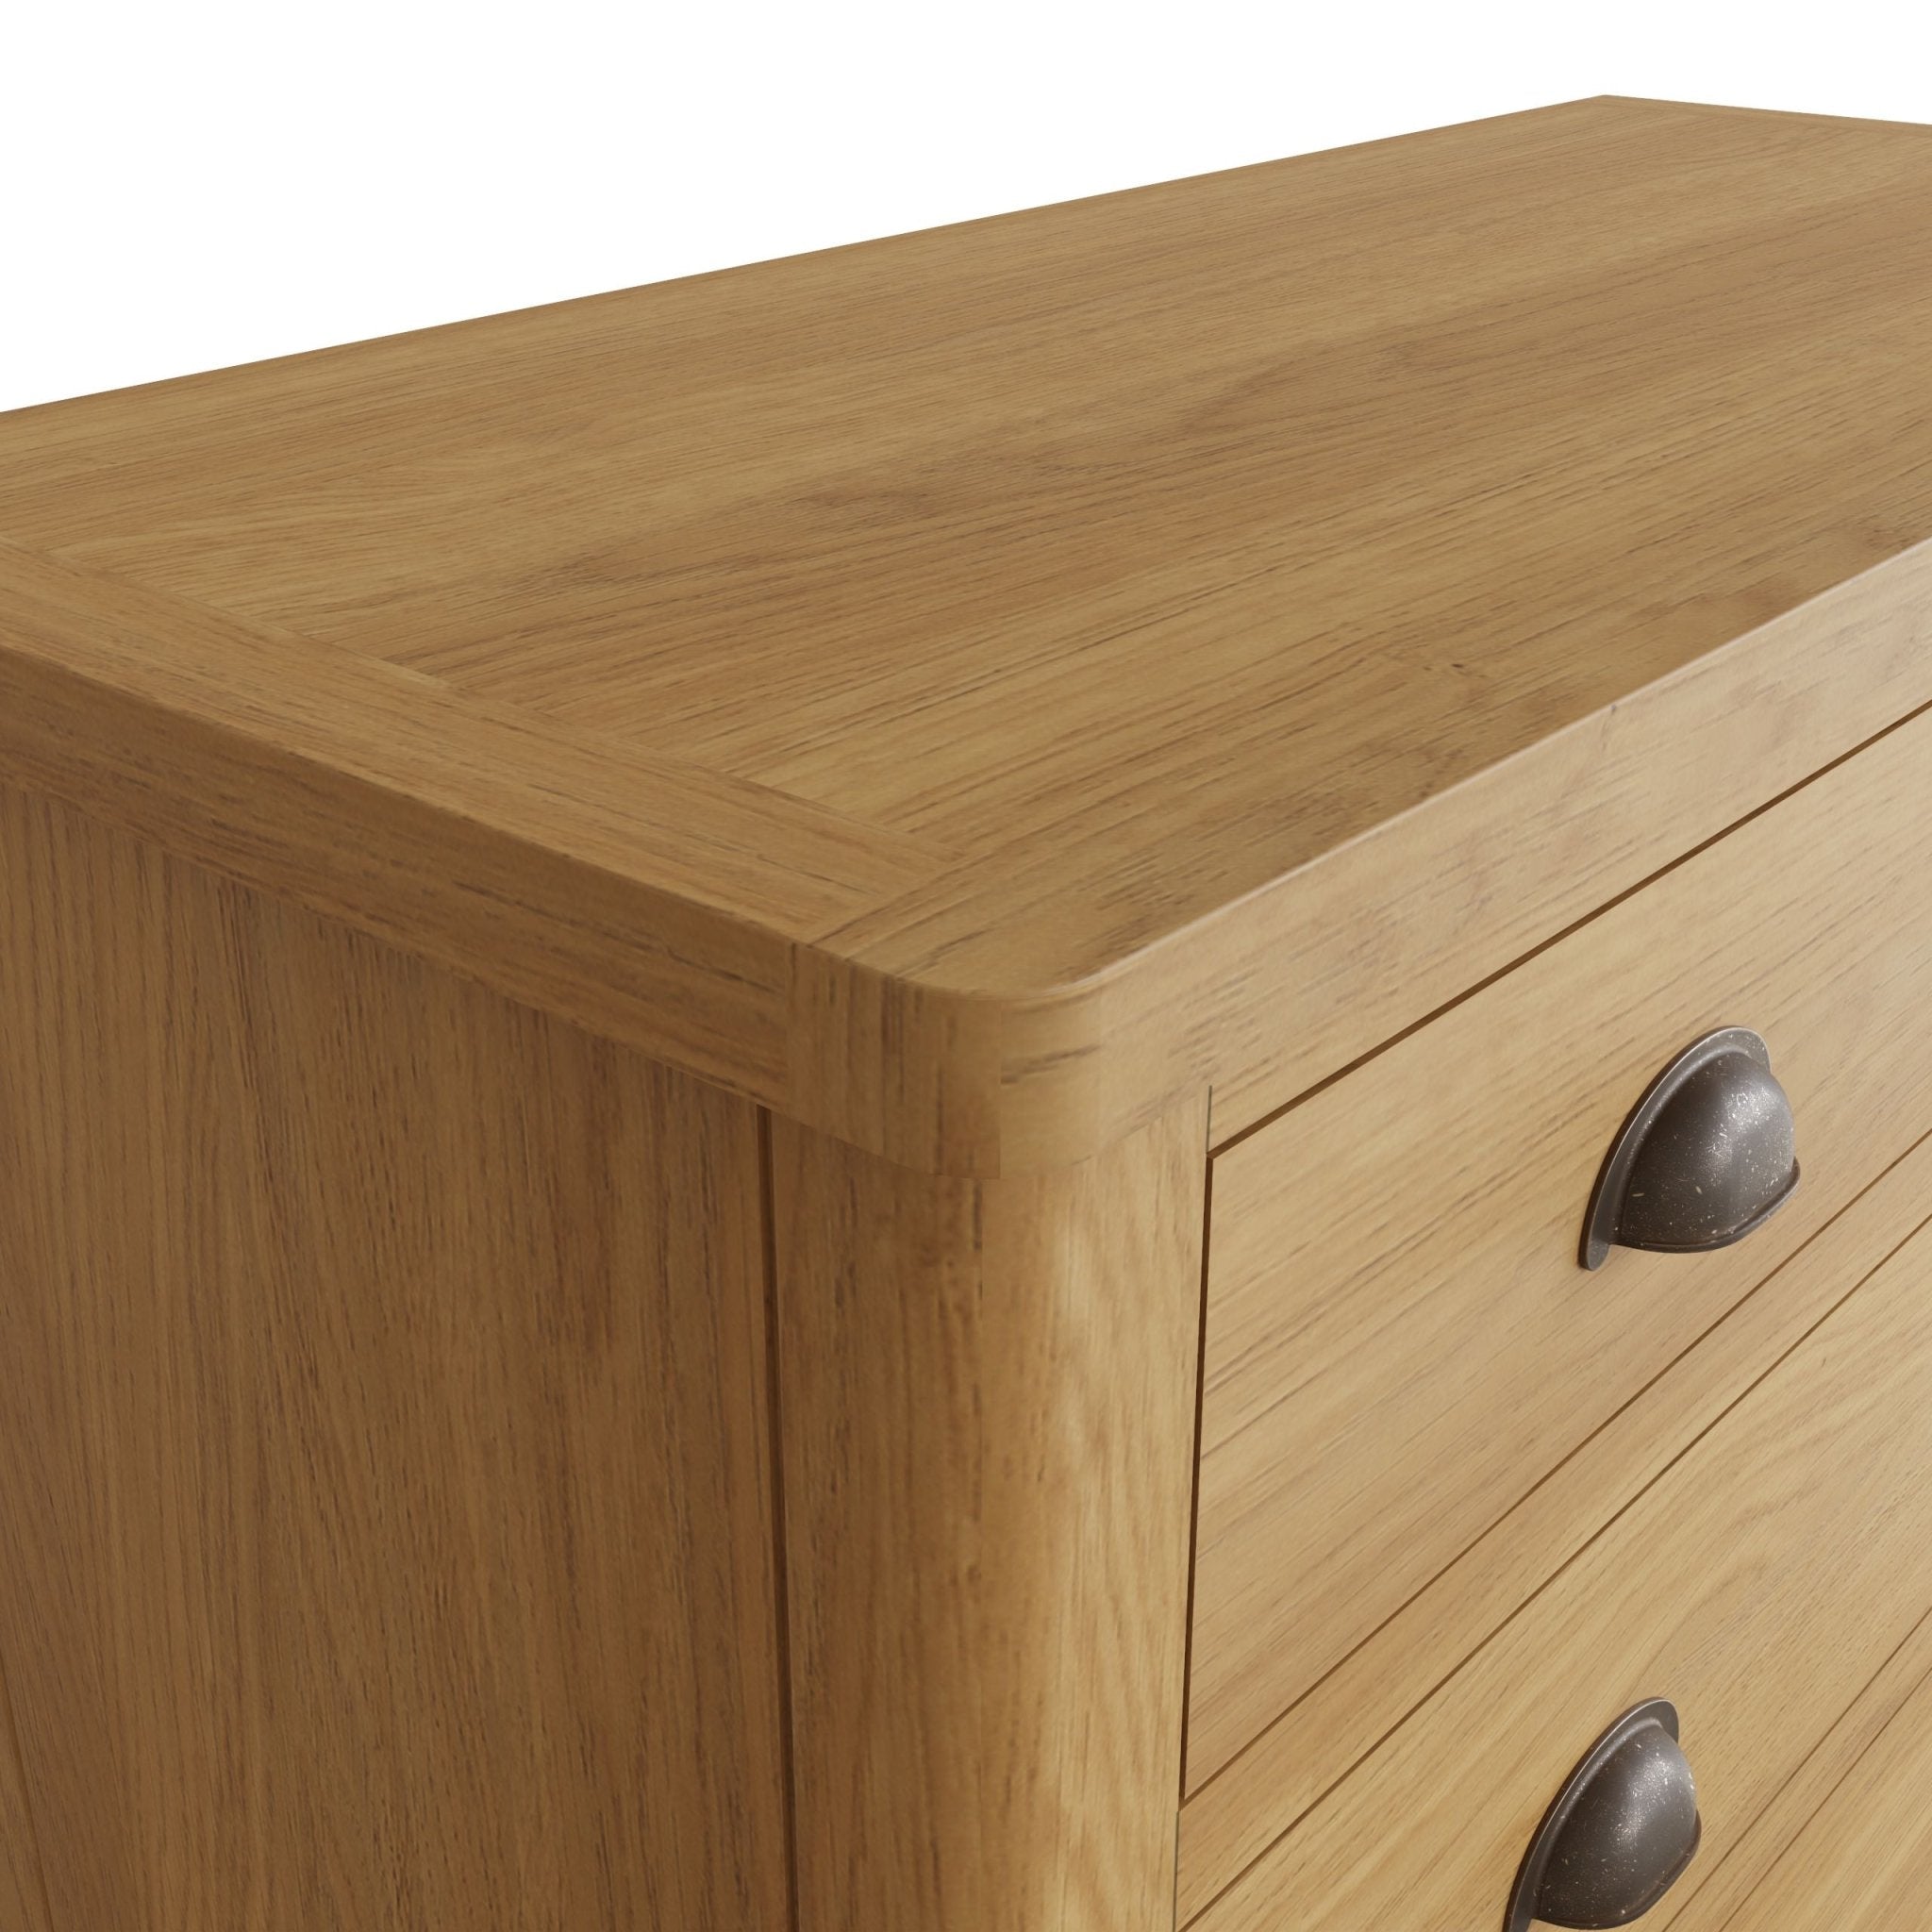 Loxwood Oak 2 Over 3 Chest of Drawers - Duck Barn Interiors